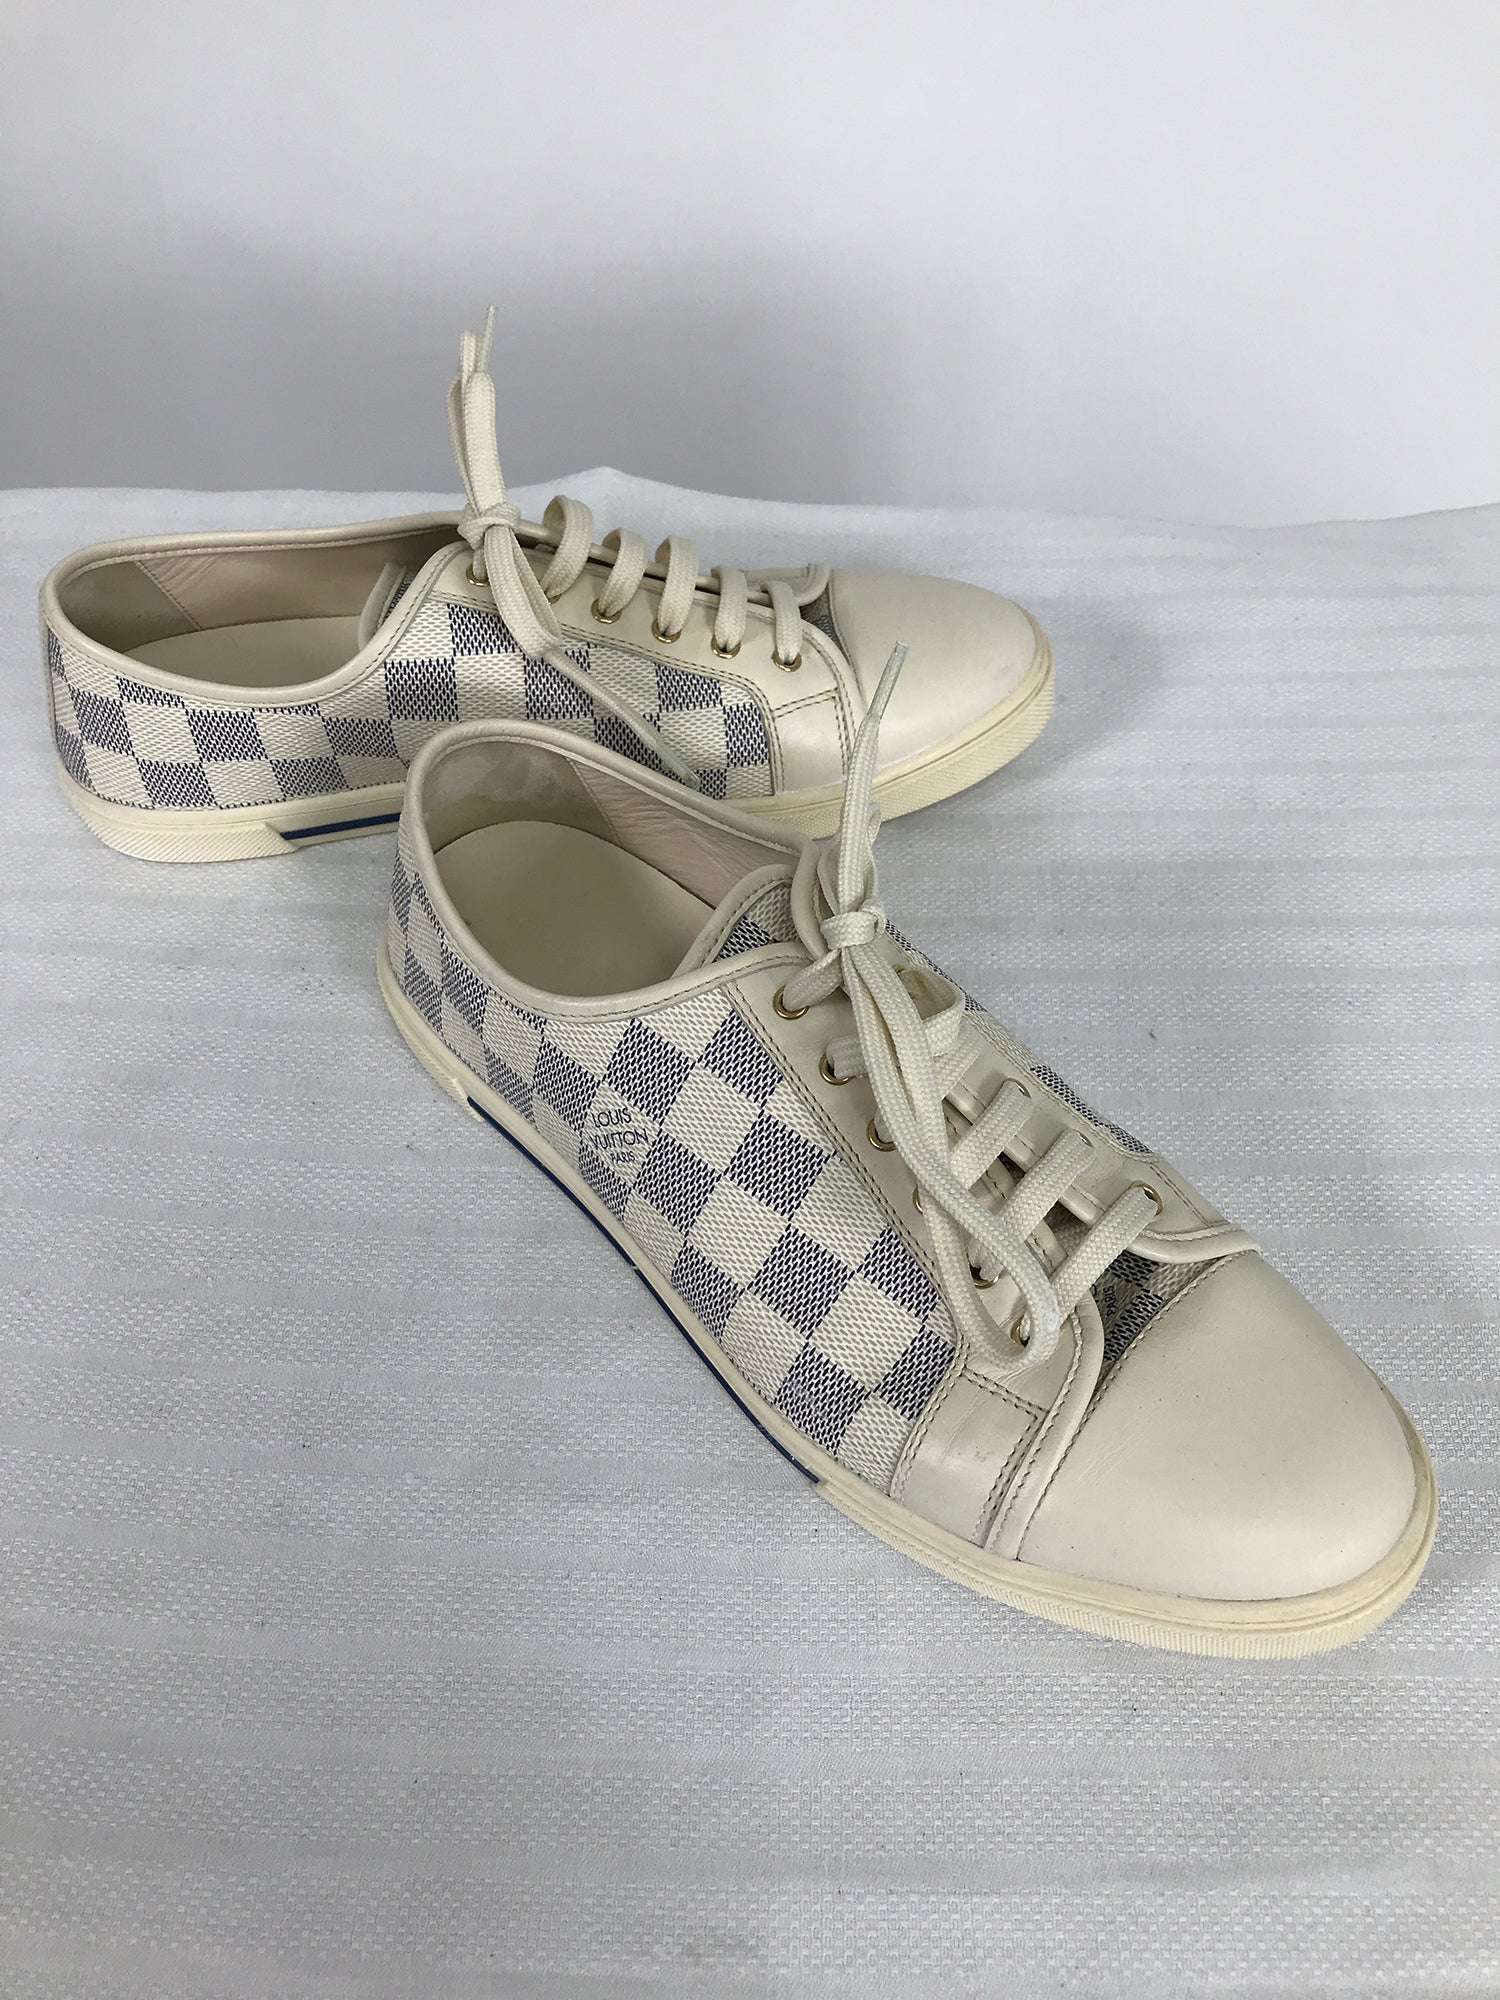 Louis Vuitton Leather Wedge Sneakers - Gold Sneakers, Shoes - LOU711443